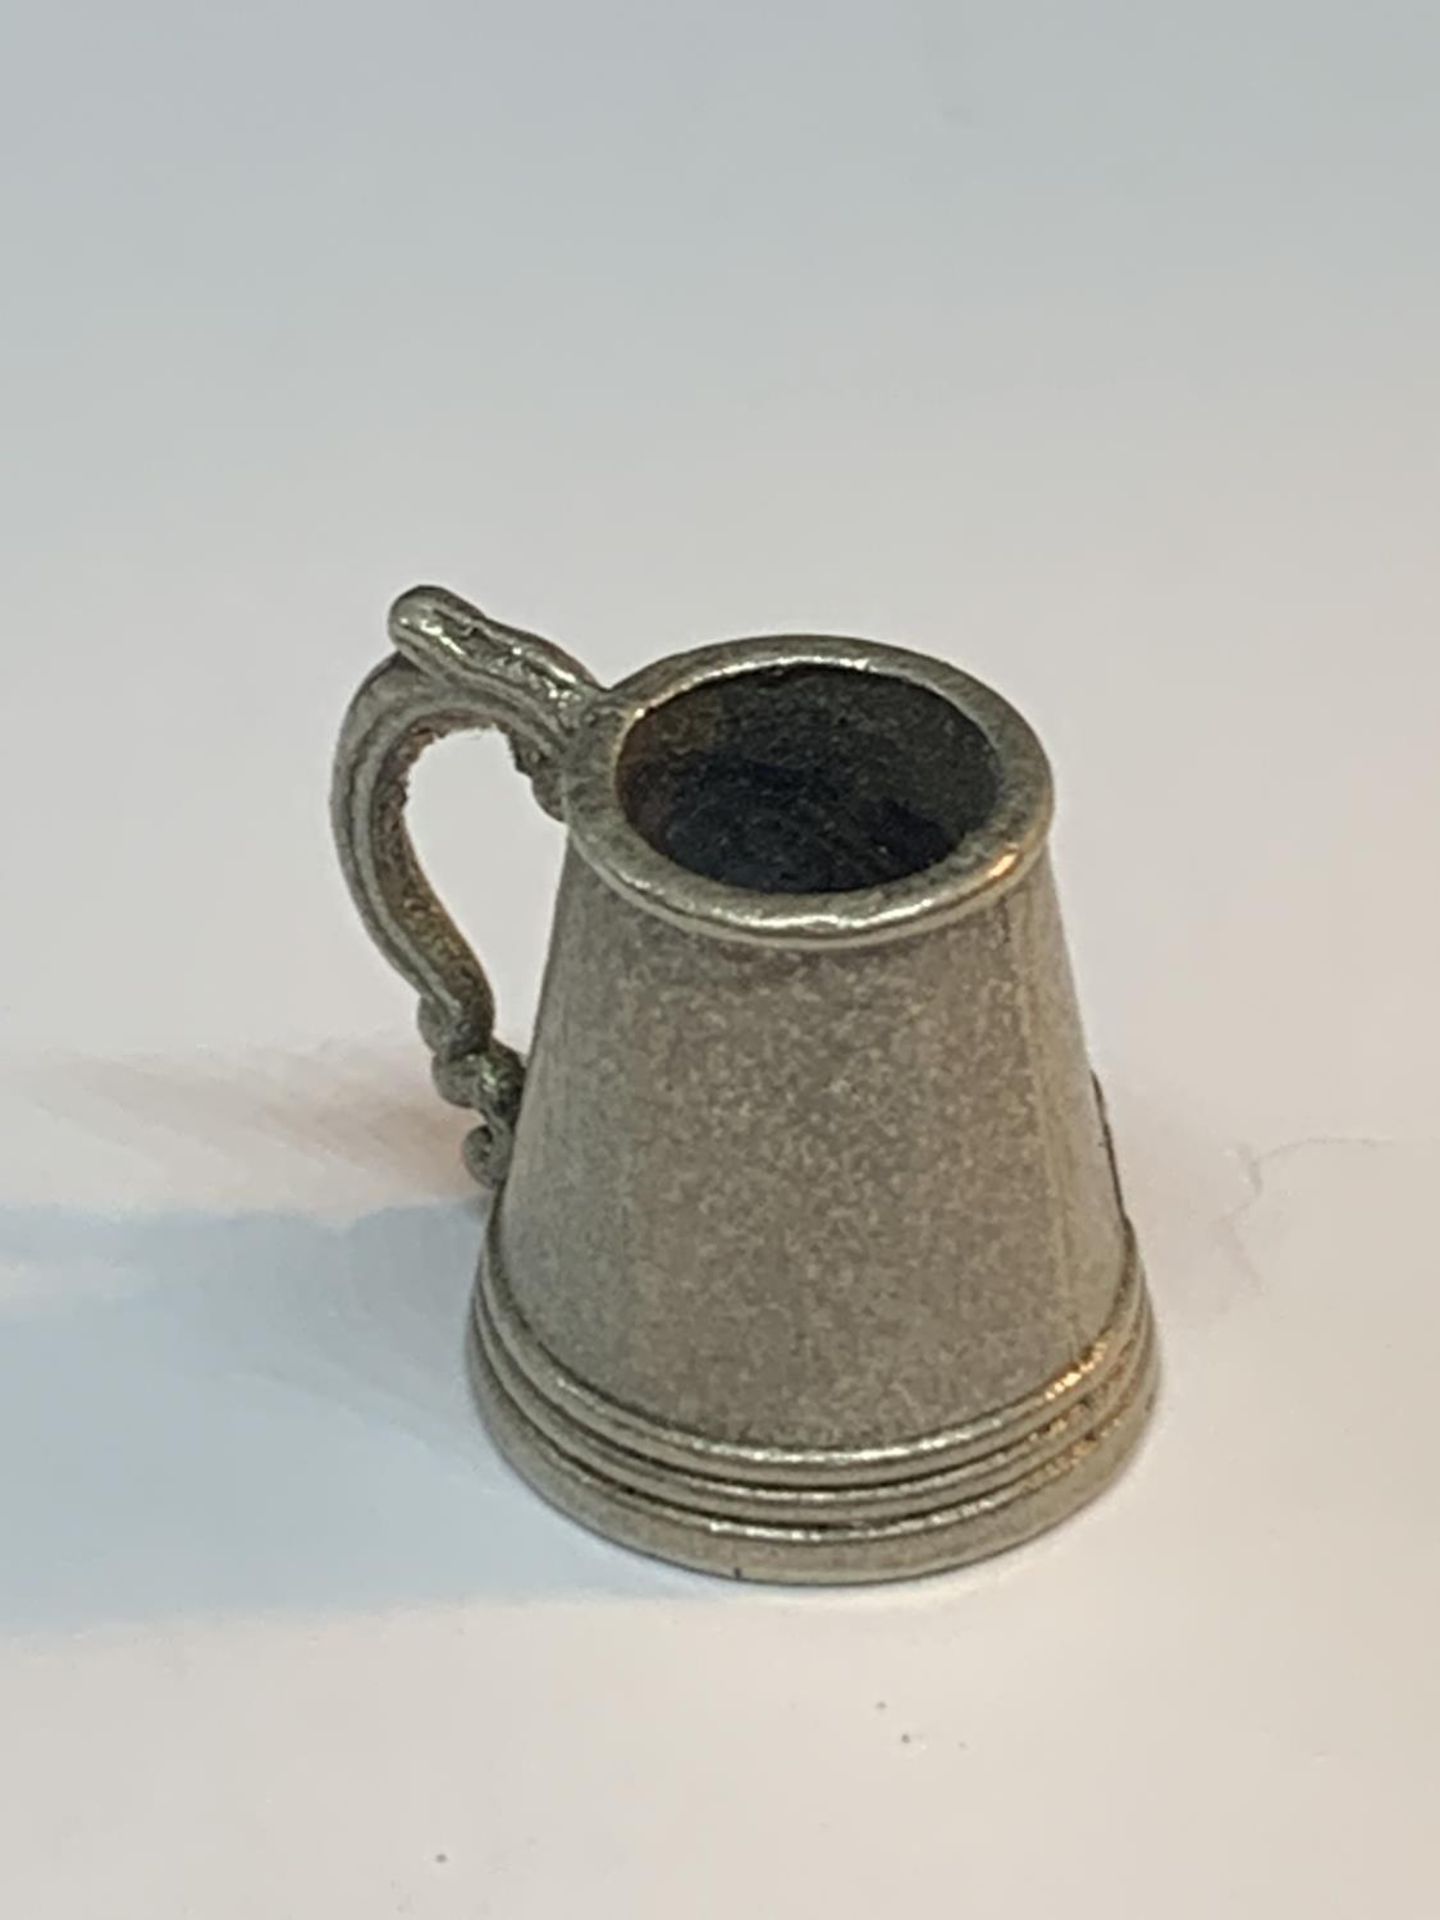 THREE VINTAGE ADVERTISING ITEMS TO INCLUDE A CRAWFORDS BISCUITS BADGE, A WHITBREAD MINIATURE TANKARD - Image 4 of 5